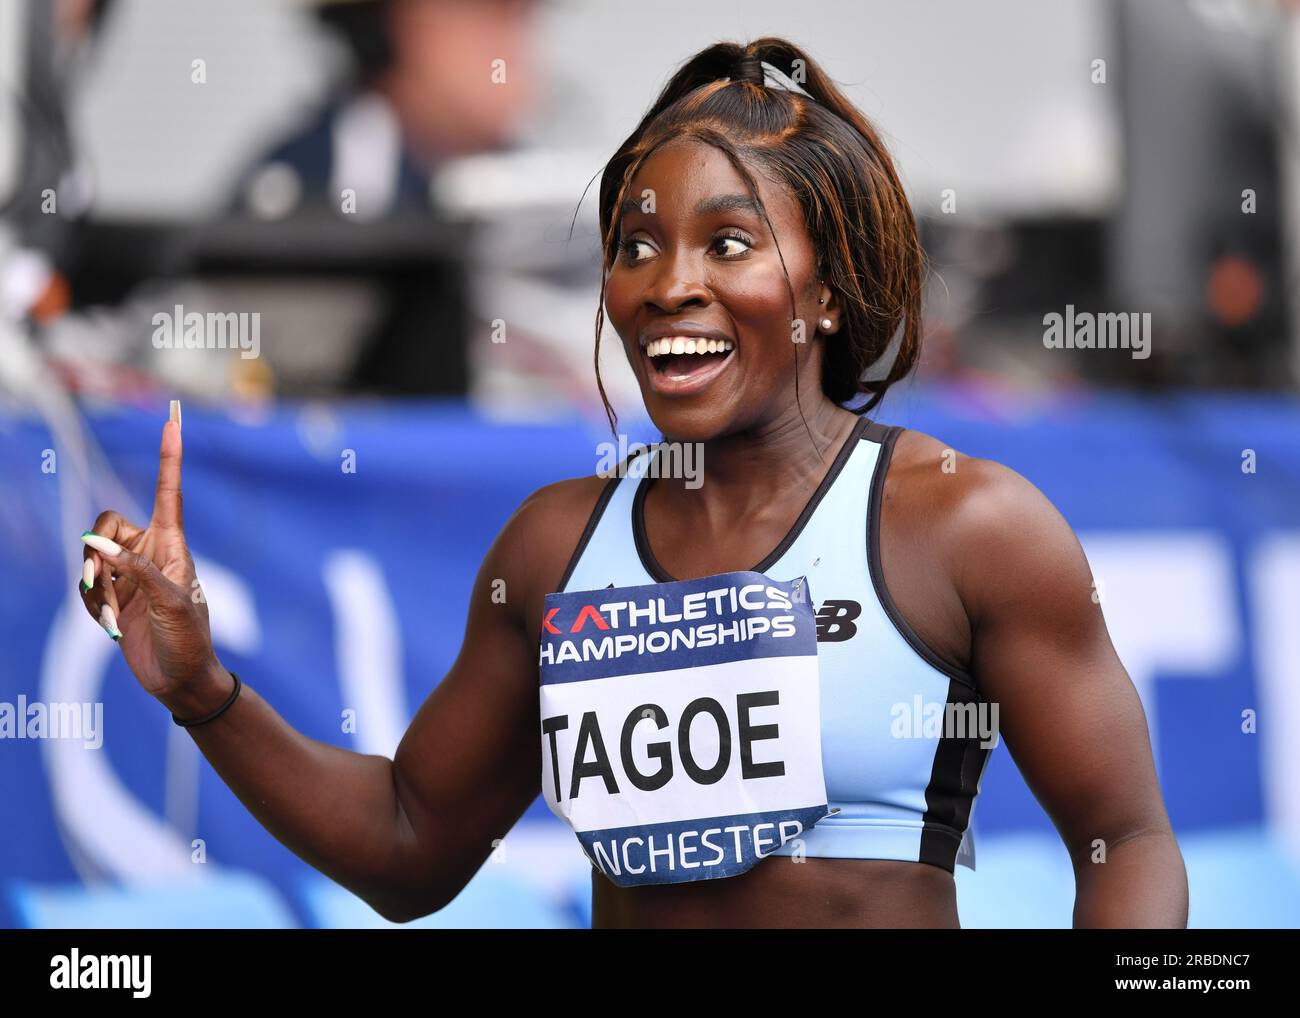 Manchester Regional Arena, Manchester, UK.  National UK Athletics Championships 2023.  Caption:  TAGOE - Womens 100 Meters    Picture: Mark Dunn/Alamy Live News (Sport) Credit: Mark Dunn Photography/Alamy Live News Stock Photo